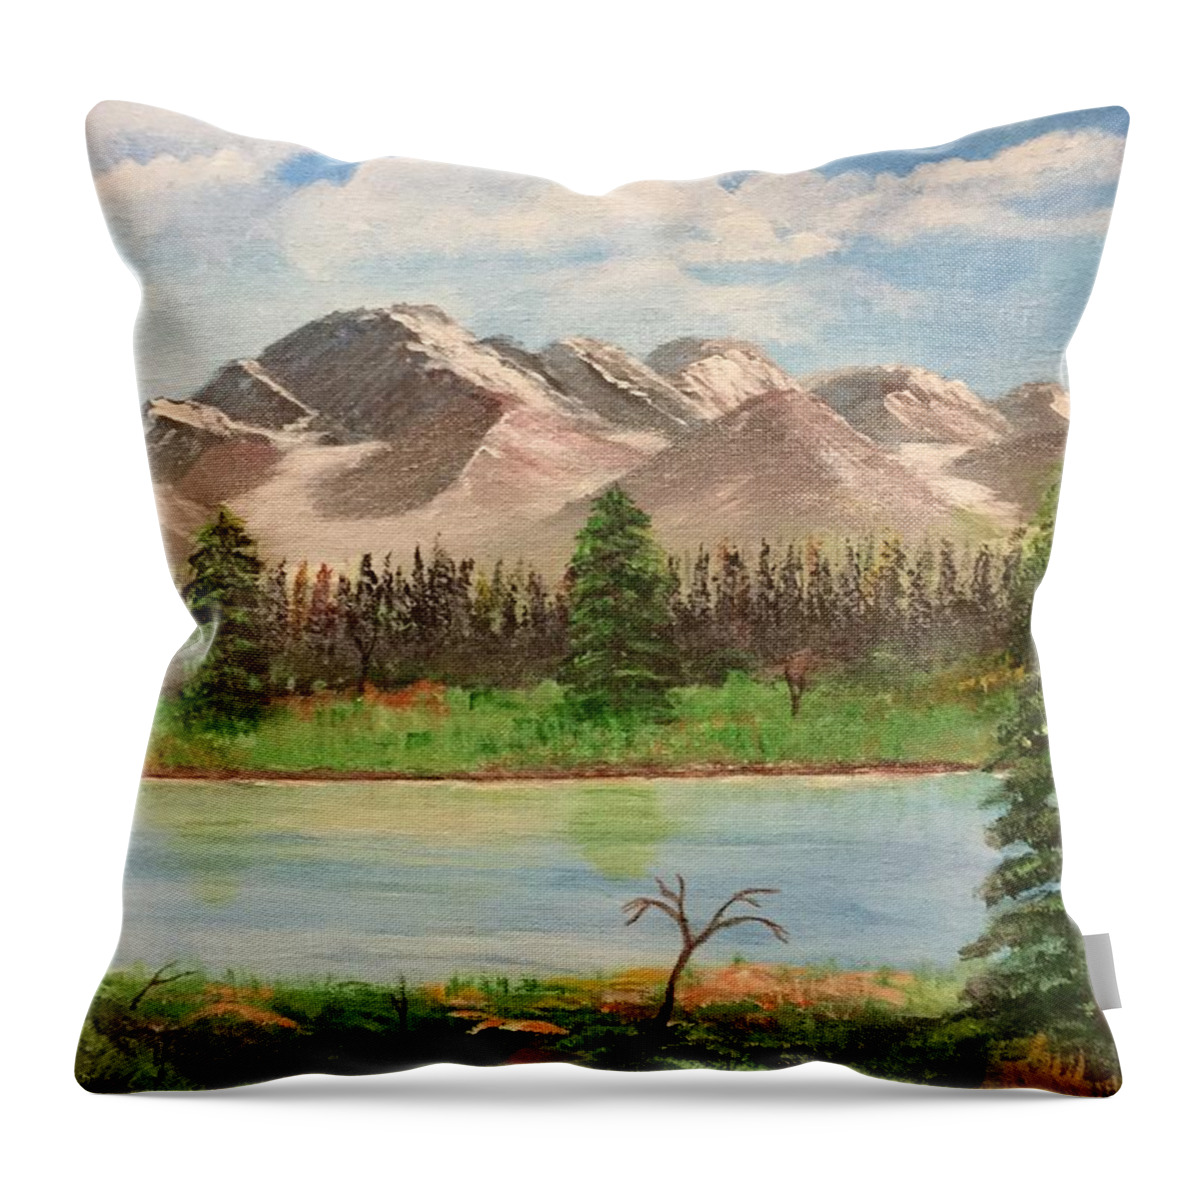  Landscape Throw Pillow featuring the painting Praise His Holy Name by Ronnie Egerton